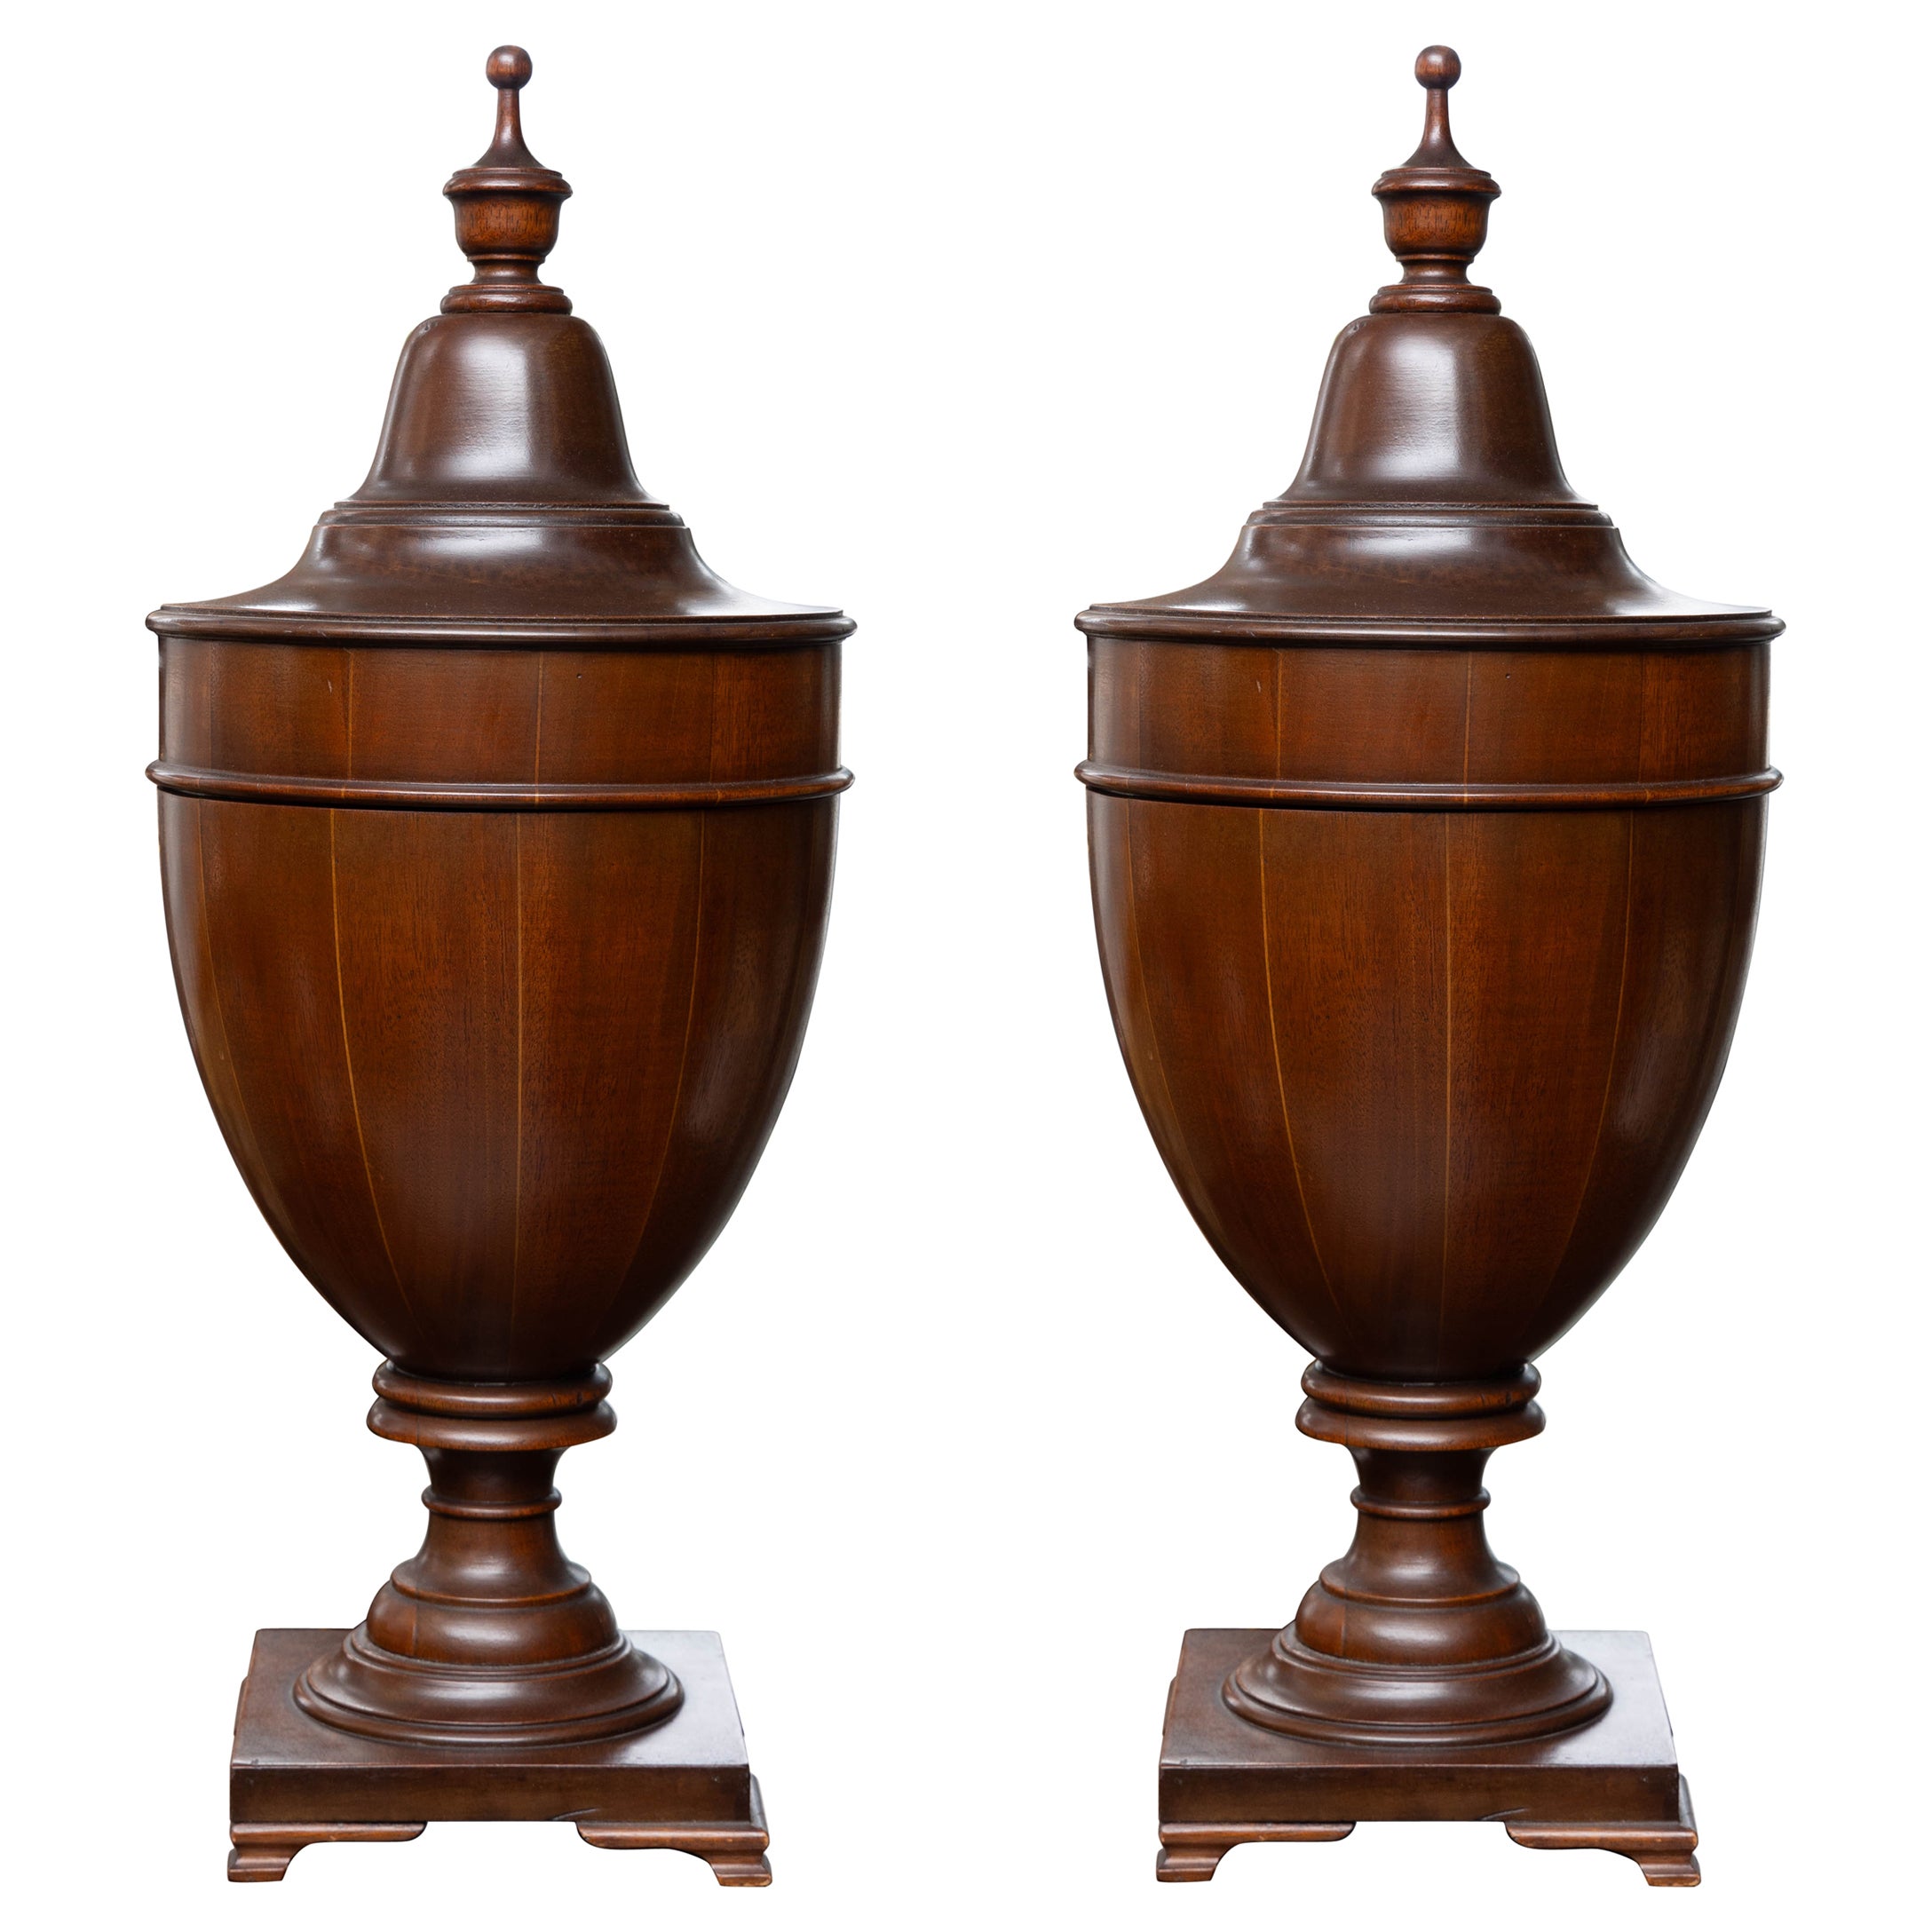 Mahogany George III Style Cutlery Urns - Pair available, priced individually. For Sale